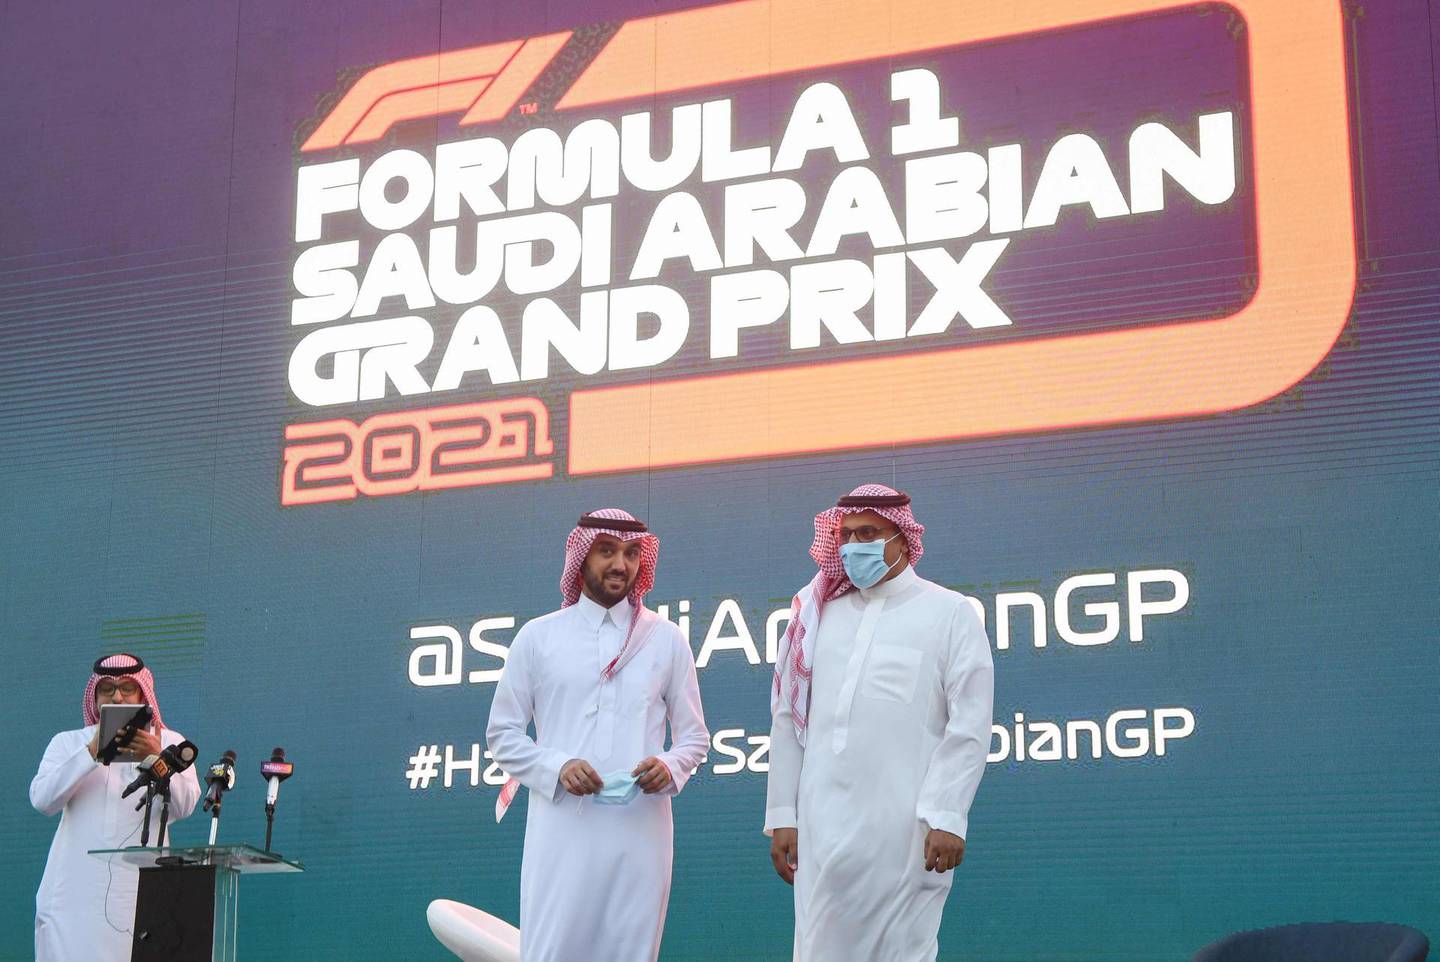 Saudi Sports Minister Prince Abdulaziz bin Turki (C) and Khalid al-Faisal, Chairman of the Saudi Automobile and Motorcycle Federation, are pictured on stage during a press conference to announce Saudi Arabian Grand Prix as part of the 2021 F1 calendar, in the Red Sea coastal city of Jeddah on November 5, 2020. Saudi Arabia said it will host a Formula One Grand Prix for the first time next year, with a night race in the Red Sea city of Jeddah. Saudi Arabia had been pencilled in for the 2021 season as part of a record 23-race Formula One programme, as the sport seeks to bounce back from a shortened 2020 season that has been disrupted by the coronavirus pandemic.  / AFP / Amer HILABI
